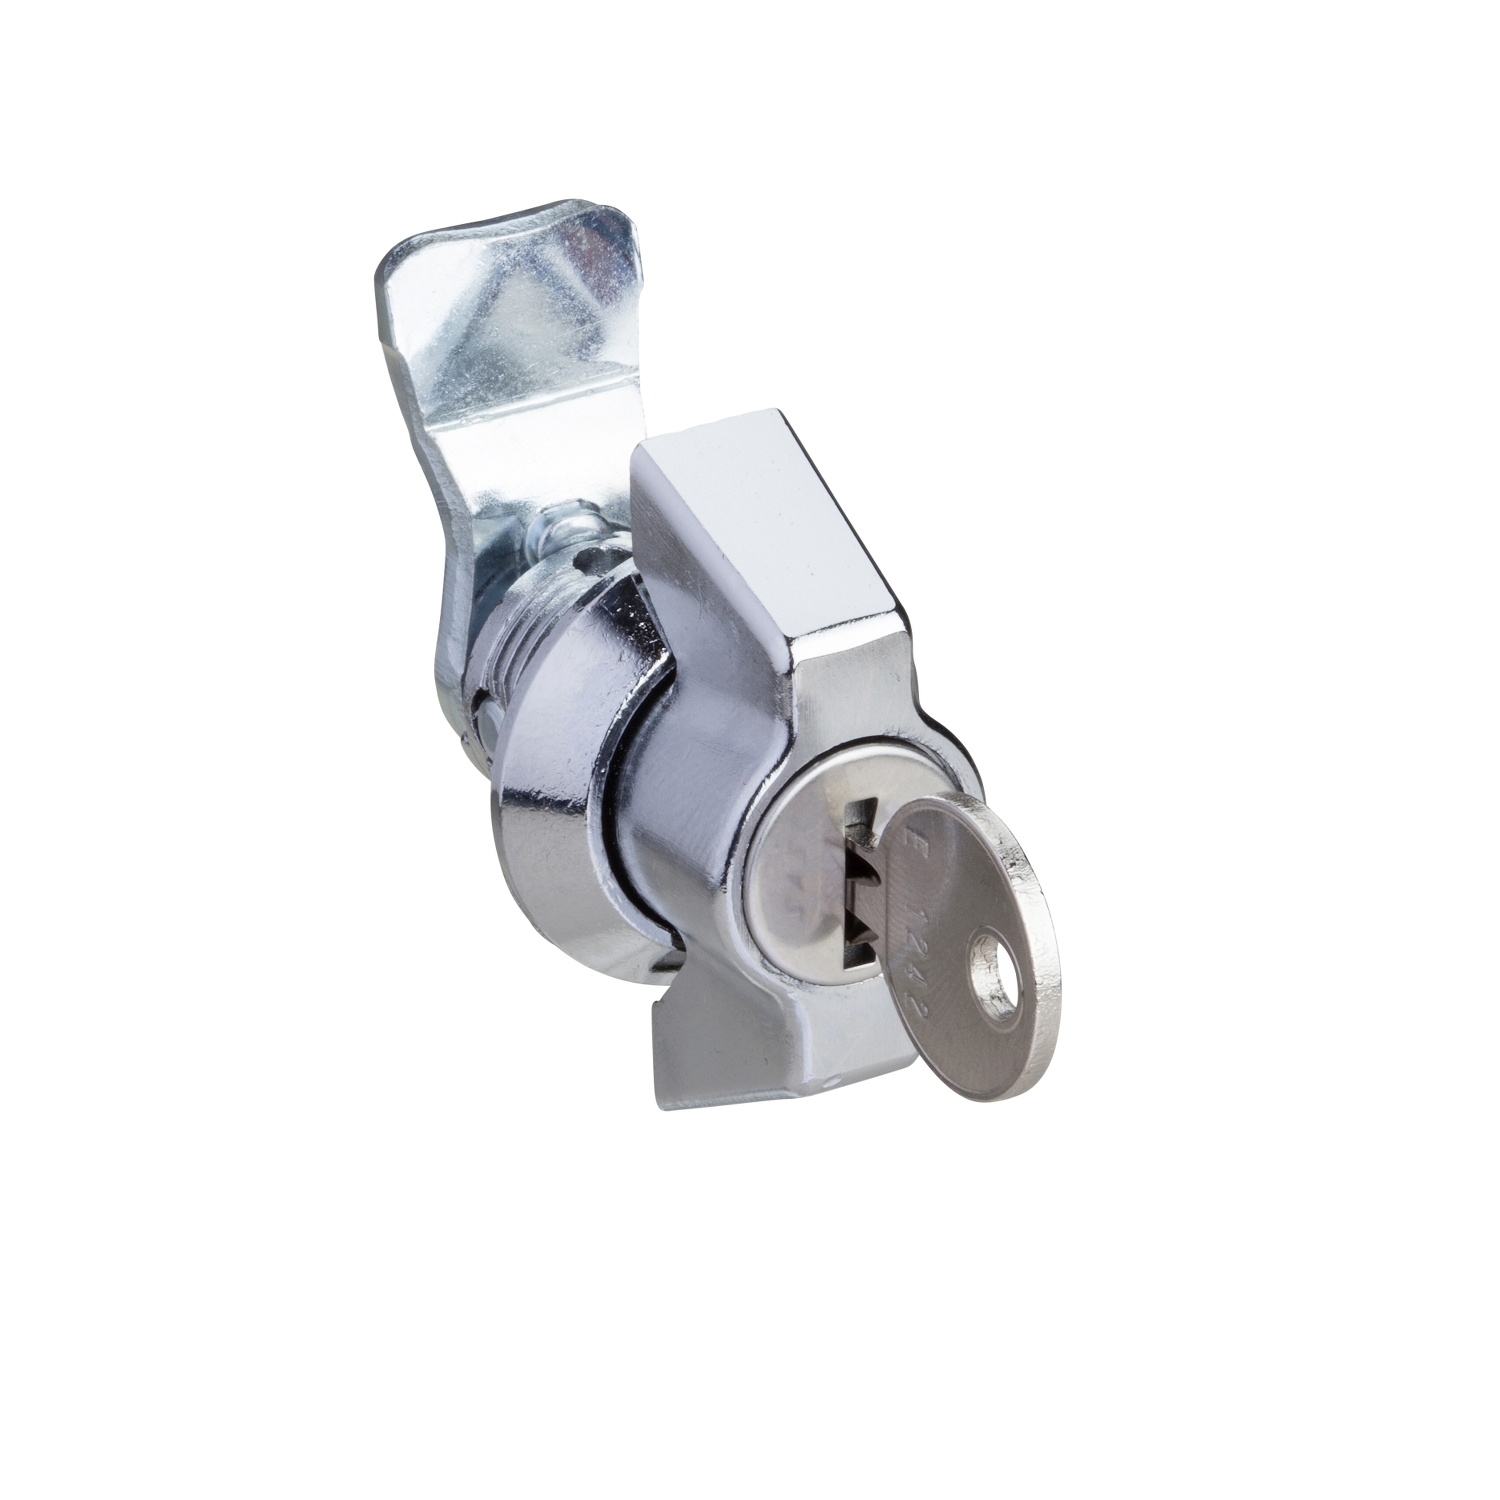 Replace. round lock, DB 3mm, for Spacial S3X enclosure, chrome-plated zamak